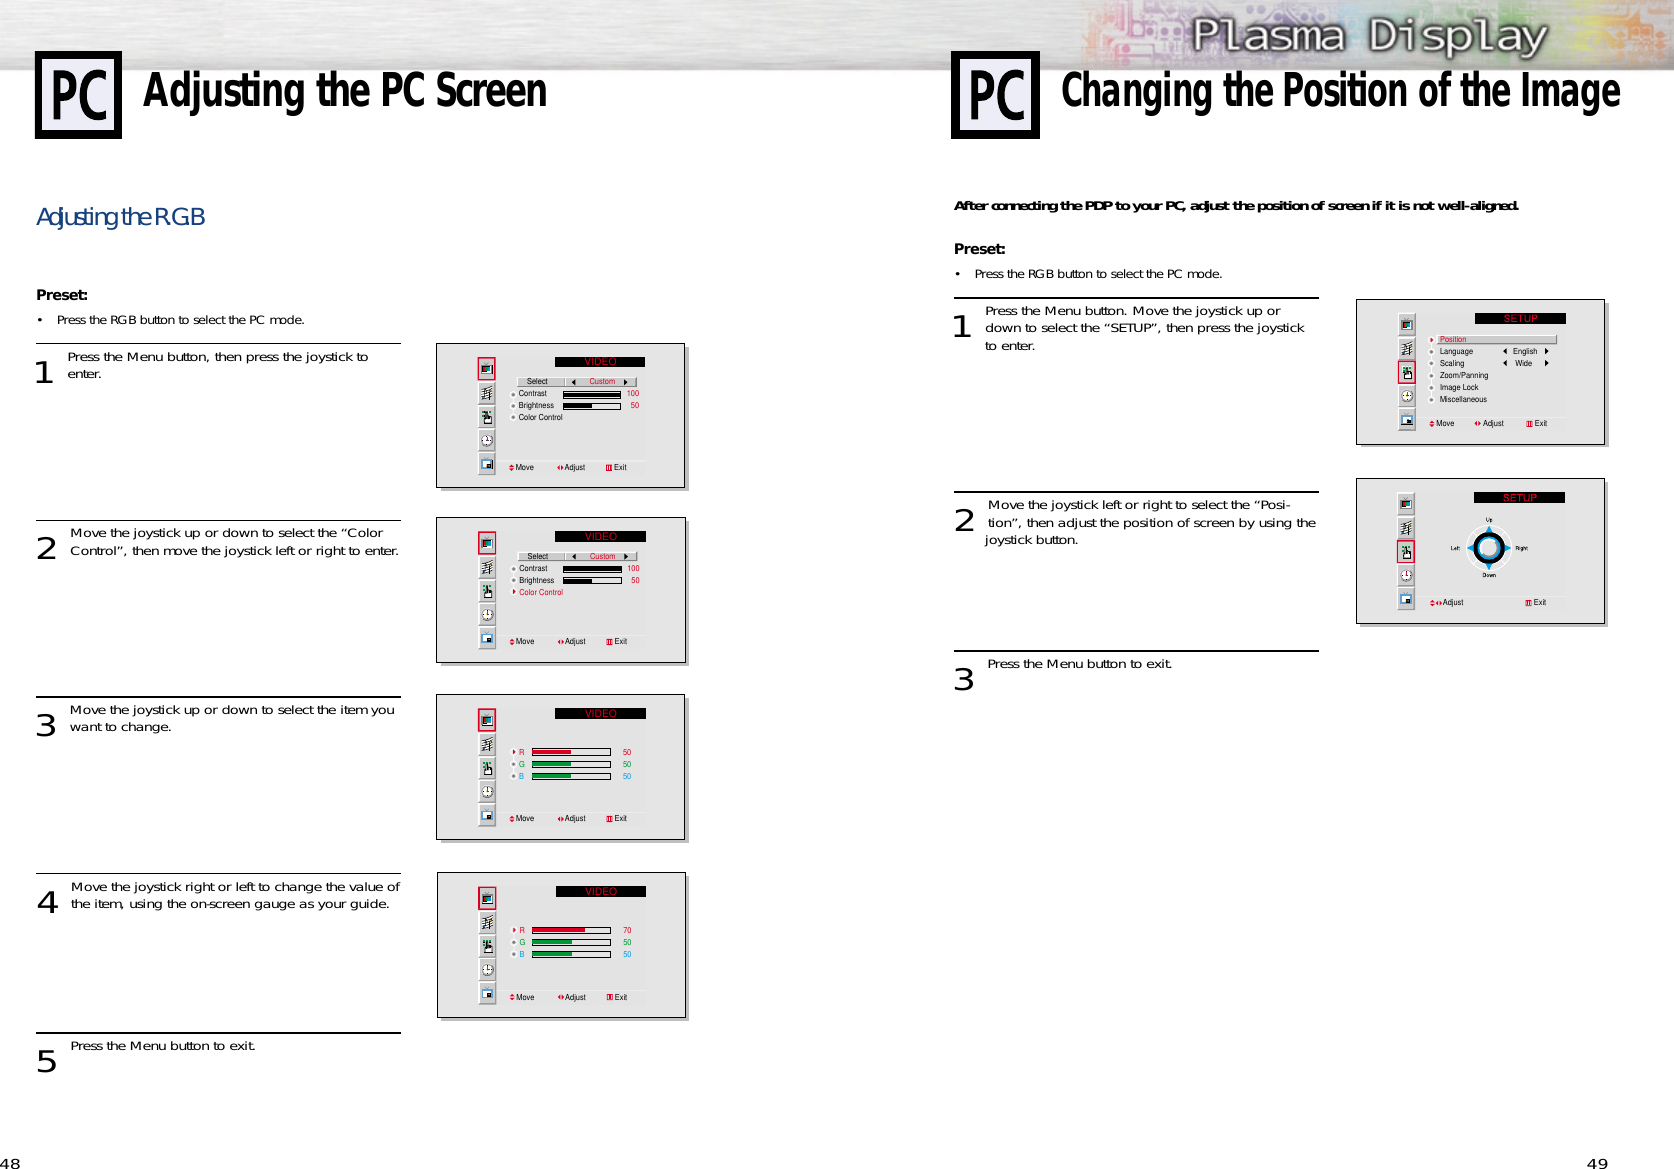 49After connecting the PDP to your PC, adjust the position of screen if it is not well-aligned.Preset: •Press the RGB button to select the PC mode. 1 Press the Menu button. Move the joystick up ordown to select the “SETUP”, then press the joystick to enter. 2 Move the joystick left or right to select the “Posi-tion”, then adjust the position of screen by using thejoystick button.  3 Press the Menu button to exit.PositionLanguage           EnglishScaling            WideZoom/PanningImage LockMiscellaneousMove              Adjust               ExitAdjust                                  Exit48Adjusting the R.G.BPreset: •Press the RGB button to select the PC mode. 1 Press the Menu button, then press the joystick toenter.2 Move the joystick up or down to select the “ColorControl”, then move the joystick left or right to enter.3 Move the joystick up or down to select the item youwant to change.4 Move the joystick right or left to change the value ofthe item, using the on-screen gauge as your guide.5 Press the Menu button to exit.Adjusting the PC ScreenVIDEO    SelectContrastBrightnessColor ControlMove               Adjust              ExitCustom                  100                    50VIDEO    SelectContrastBrightnessColor ControlMove               Adjust              ExitCustom                  100                    50VIDEORGB505050Move               Adjust              ExitVIDEORGB705050Move               Adjust              ExitChanging the Position of the Image